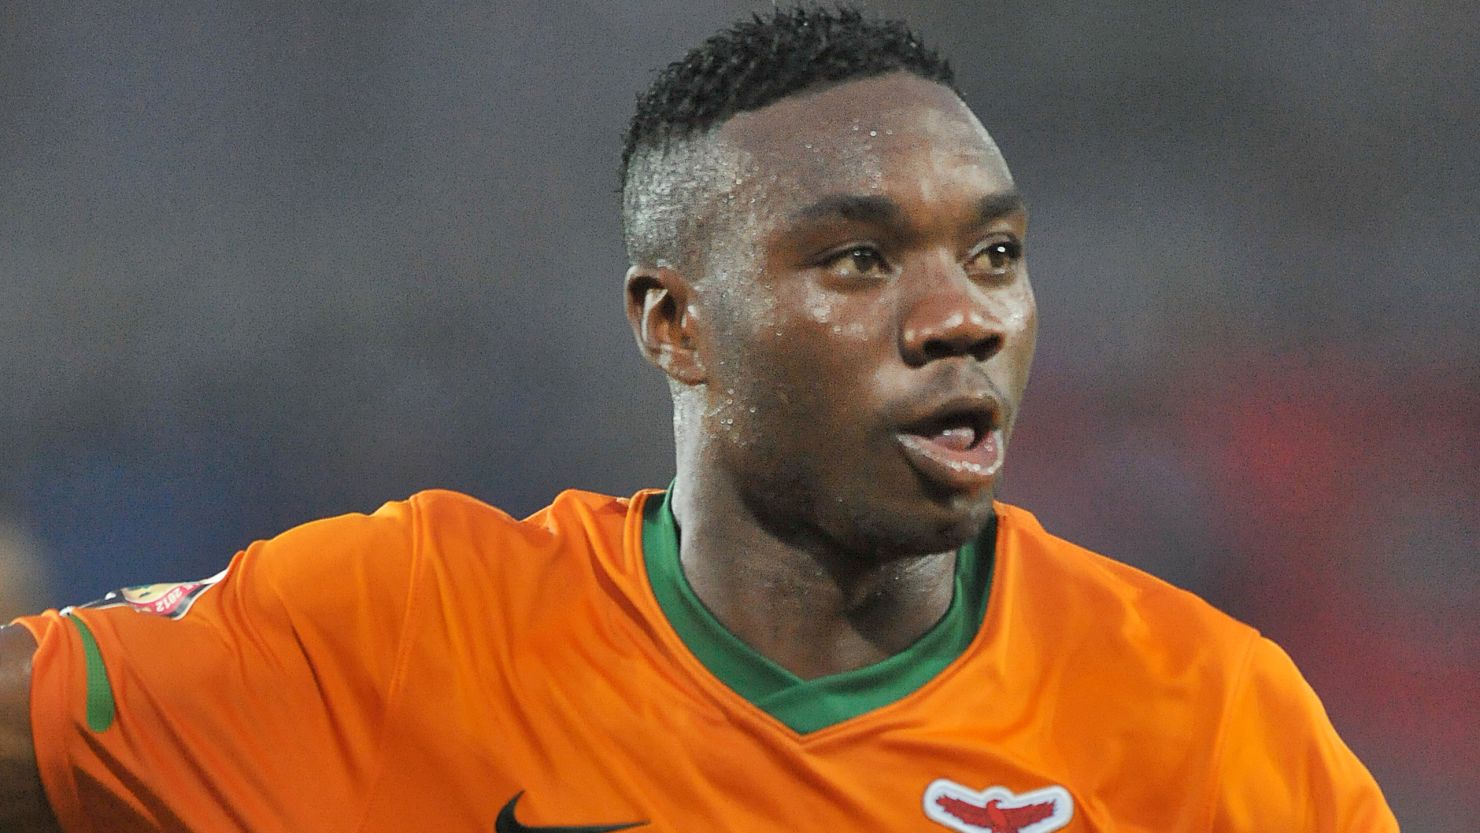 Emmanuel Mayuka scored the only goal as Zambia shocked Ghana in the Africa Cup of Nations semifinals.